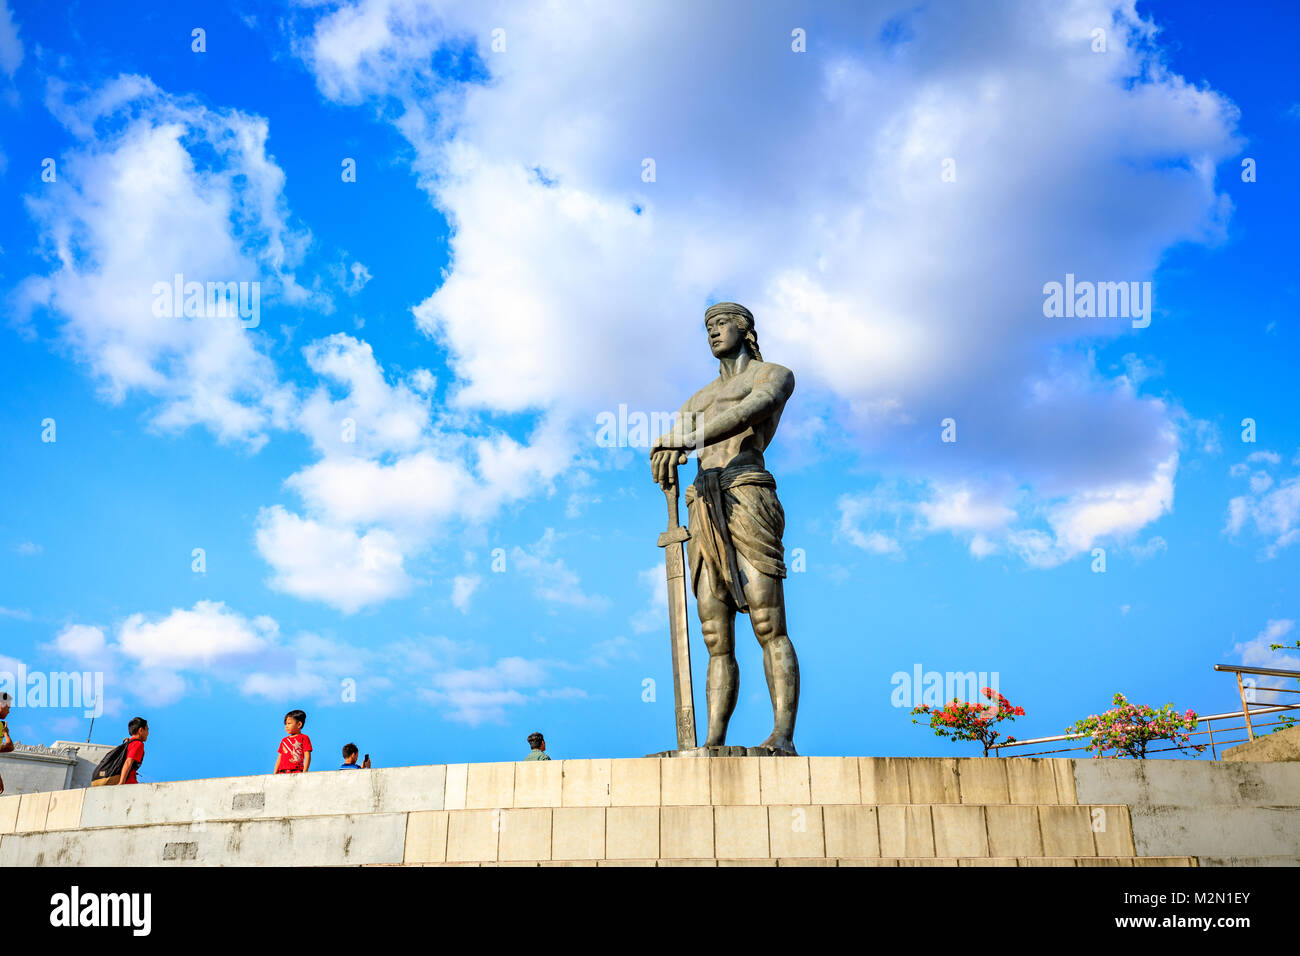 Manila, Philippines - Feb 4, 2018 : The Statue of the Sentinel of Freedom (Lapu Lapu Monument) in Rizal Park at the center of the Agrifina Circle, Man Stock Photo